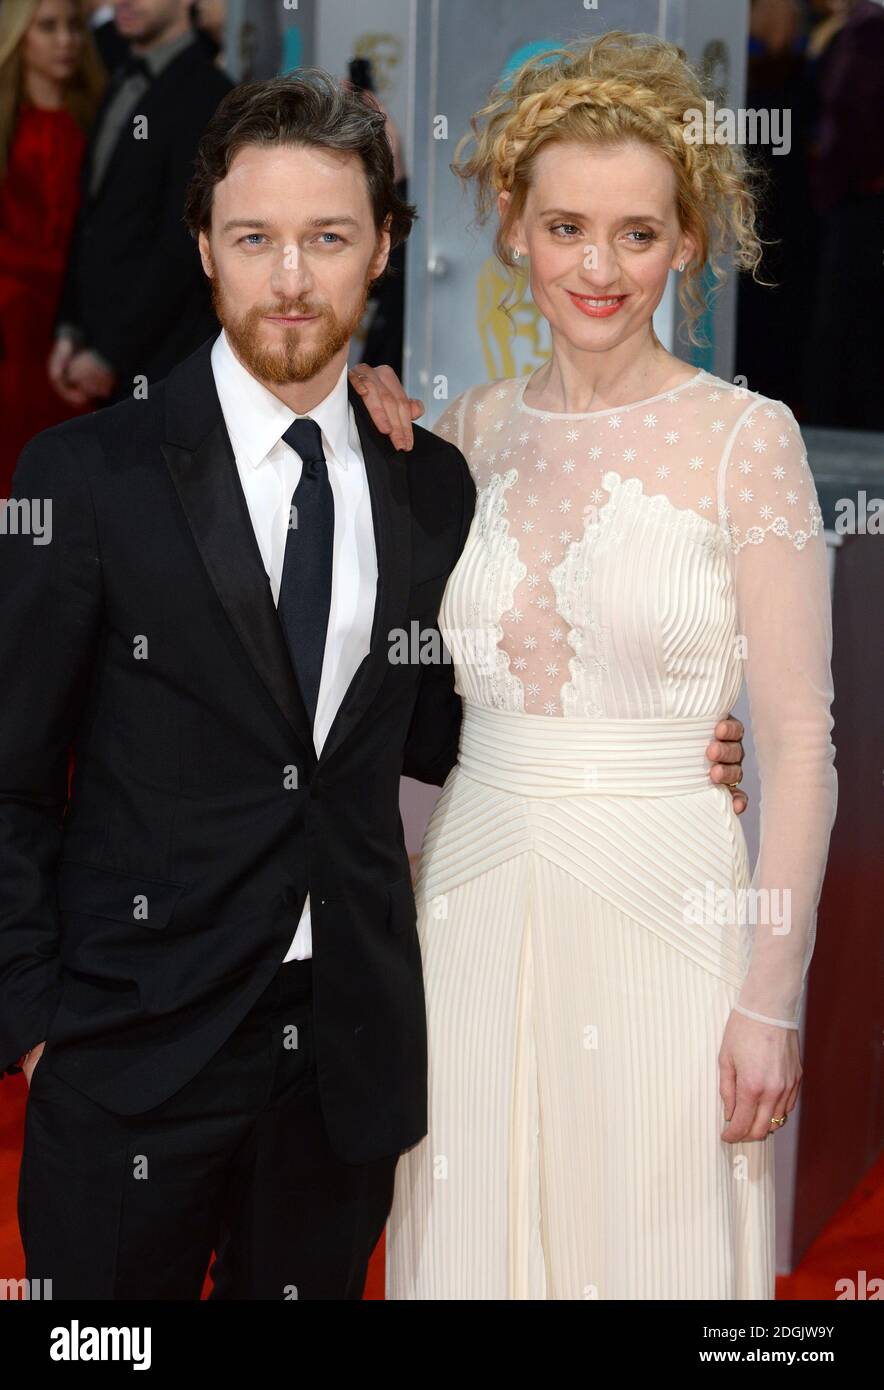 James McAvoy and wife Anne-Marie Duff attending the EE British Academy Film Awards 2015 held at the Royal Opera House in Covent Garden, London UK. Stock Photo